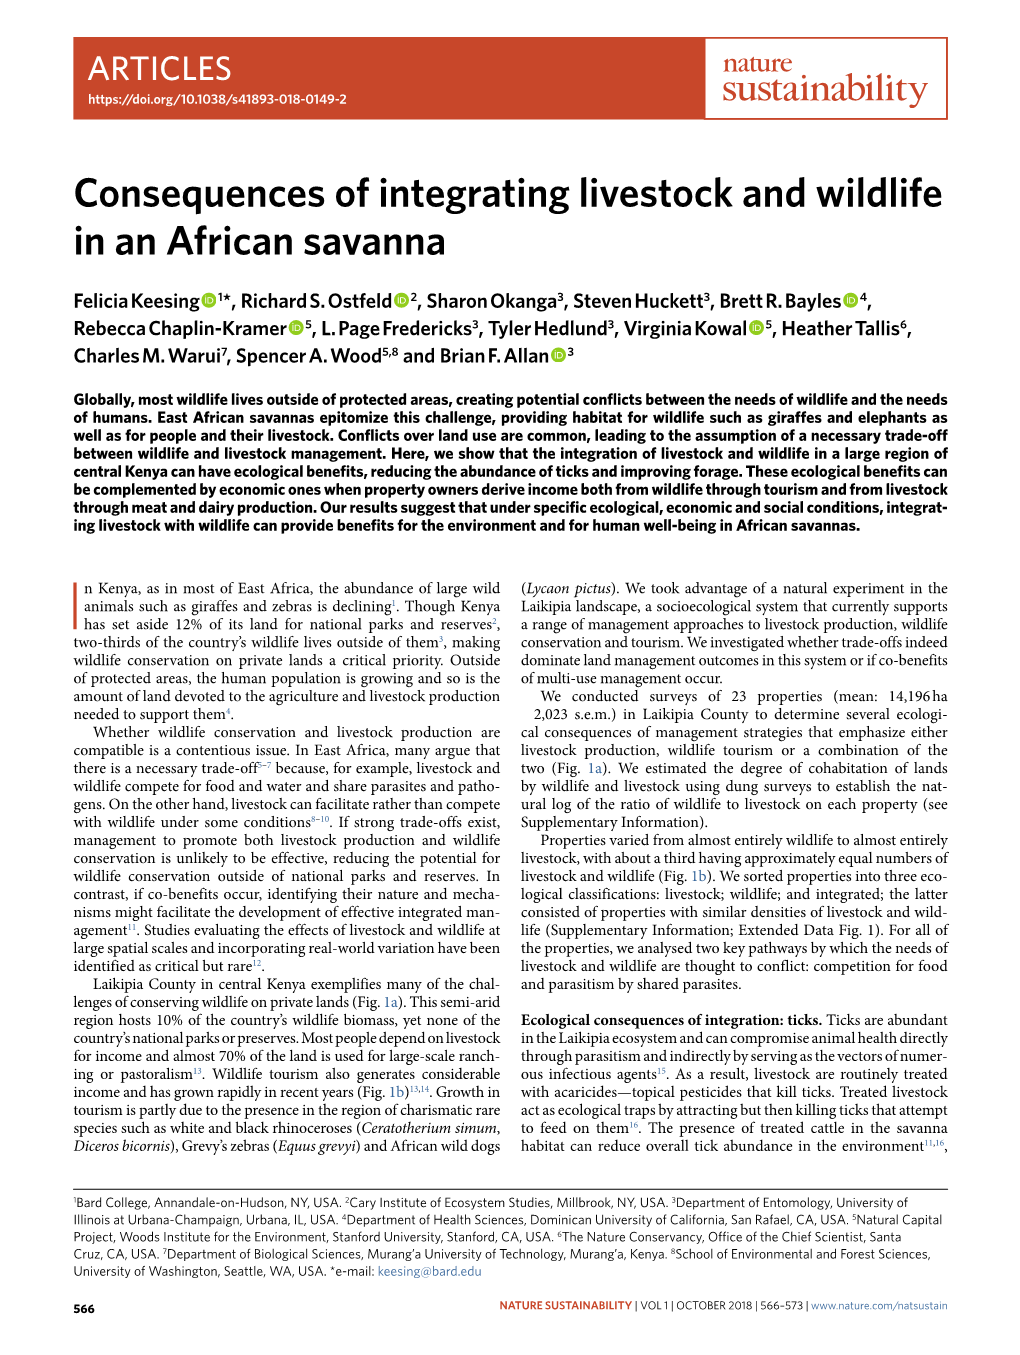 Consequences of Integrating Livestock and Wildlife in an African Savanna